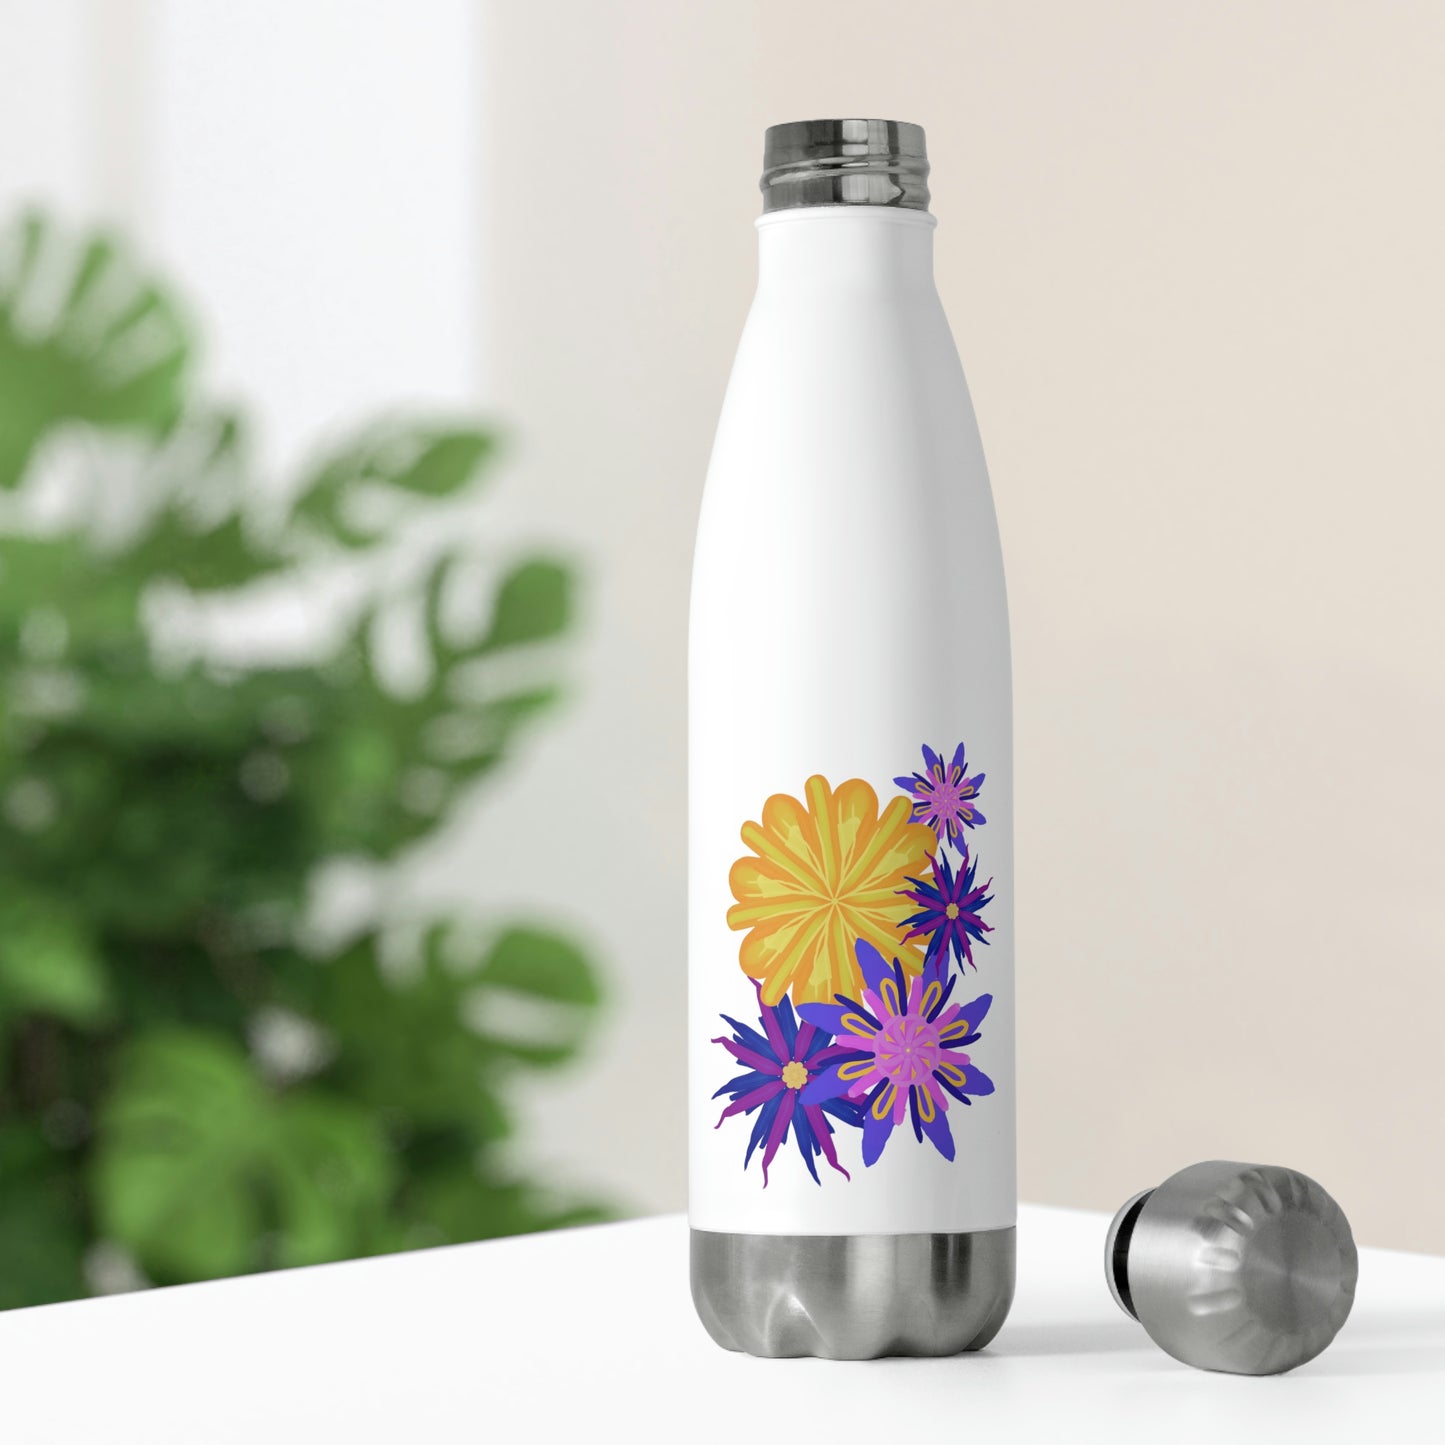 Fanciful Flowers 2 20oz Insulated Bottle